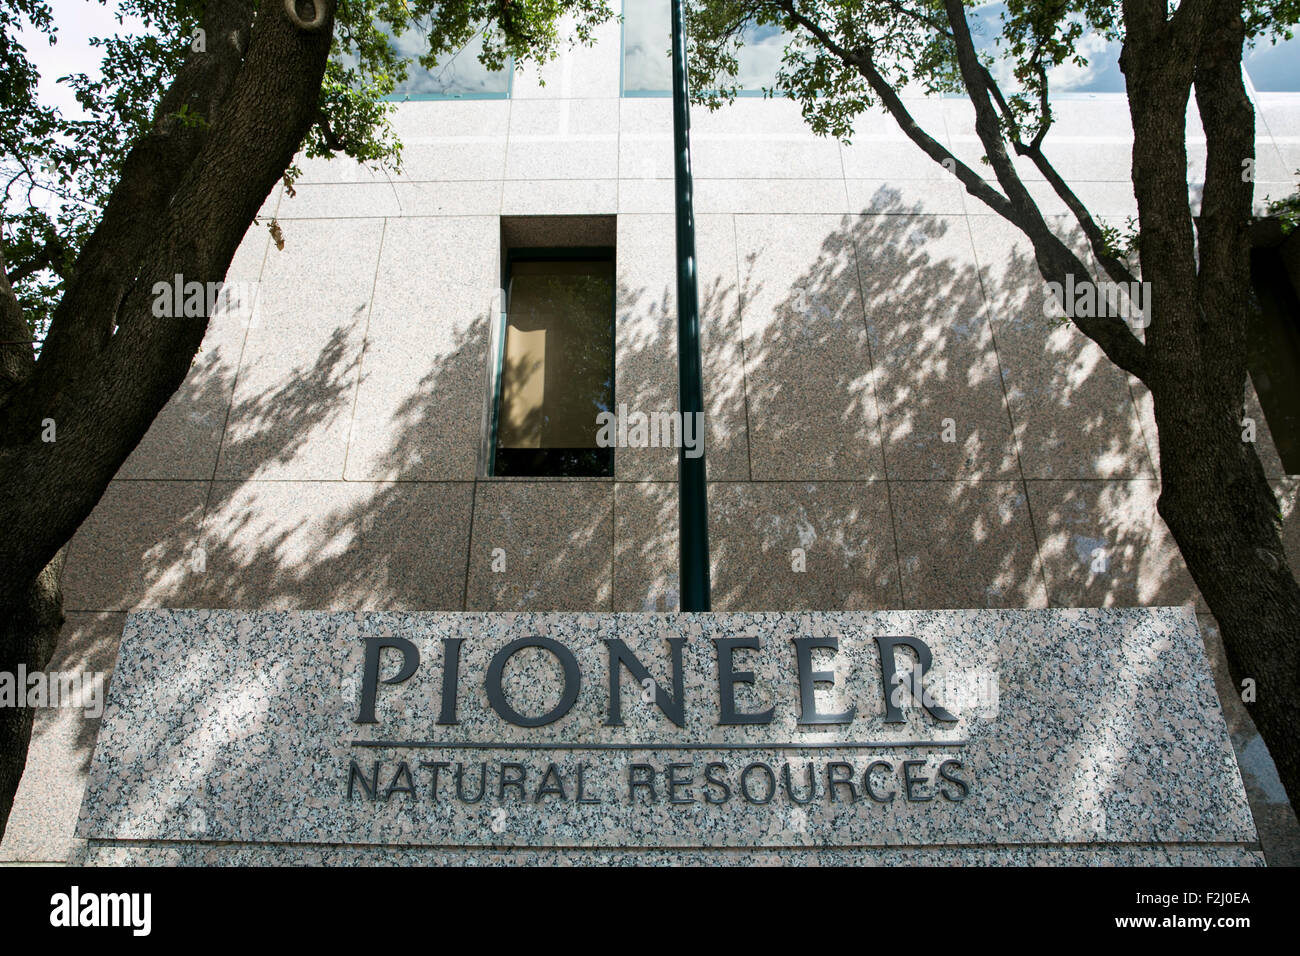 A logo sign outside of the headquarters of the Pioneer Natural Resources Co., in Irving, Texas on September 13, 2015. Stock Photo